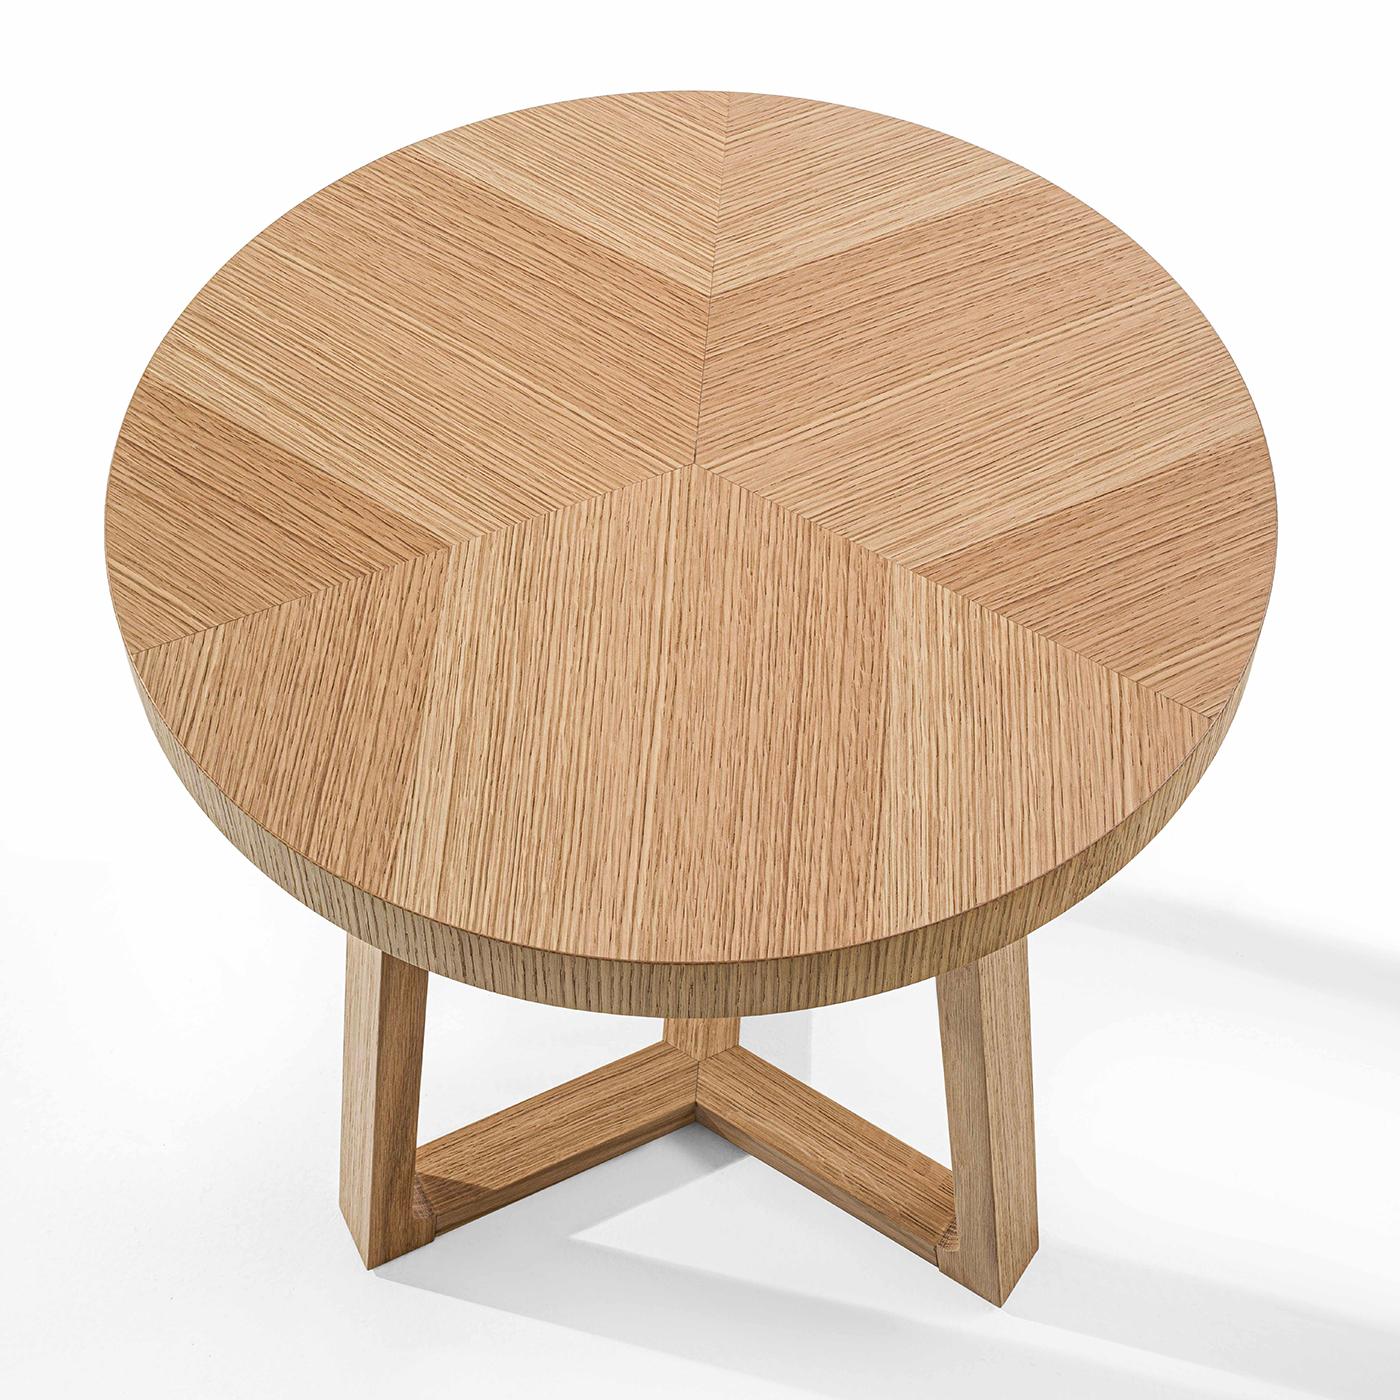 Playfully named after the Italian for crossroads due to the branched element that its three slanted legs are fitted to, this round side table will make for an exquisite solution to flank a sofa or armchair in modern and contemporary decors. The